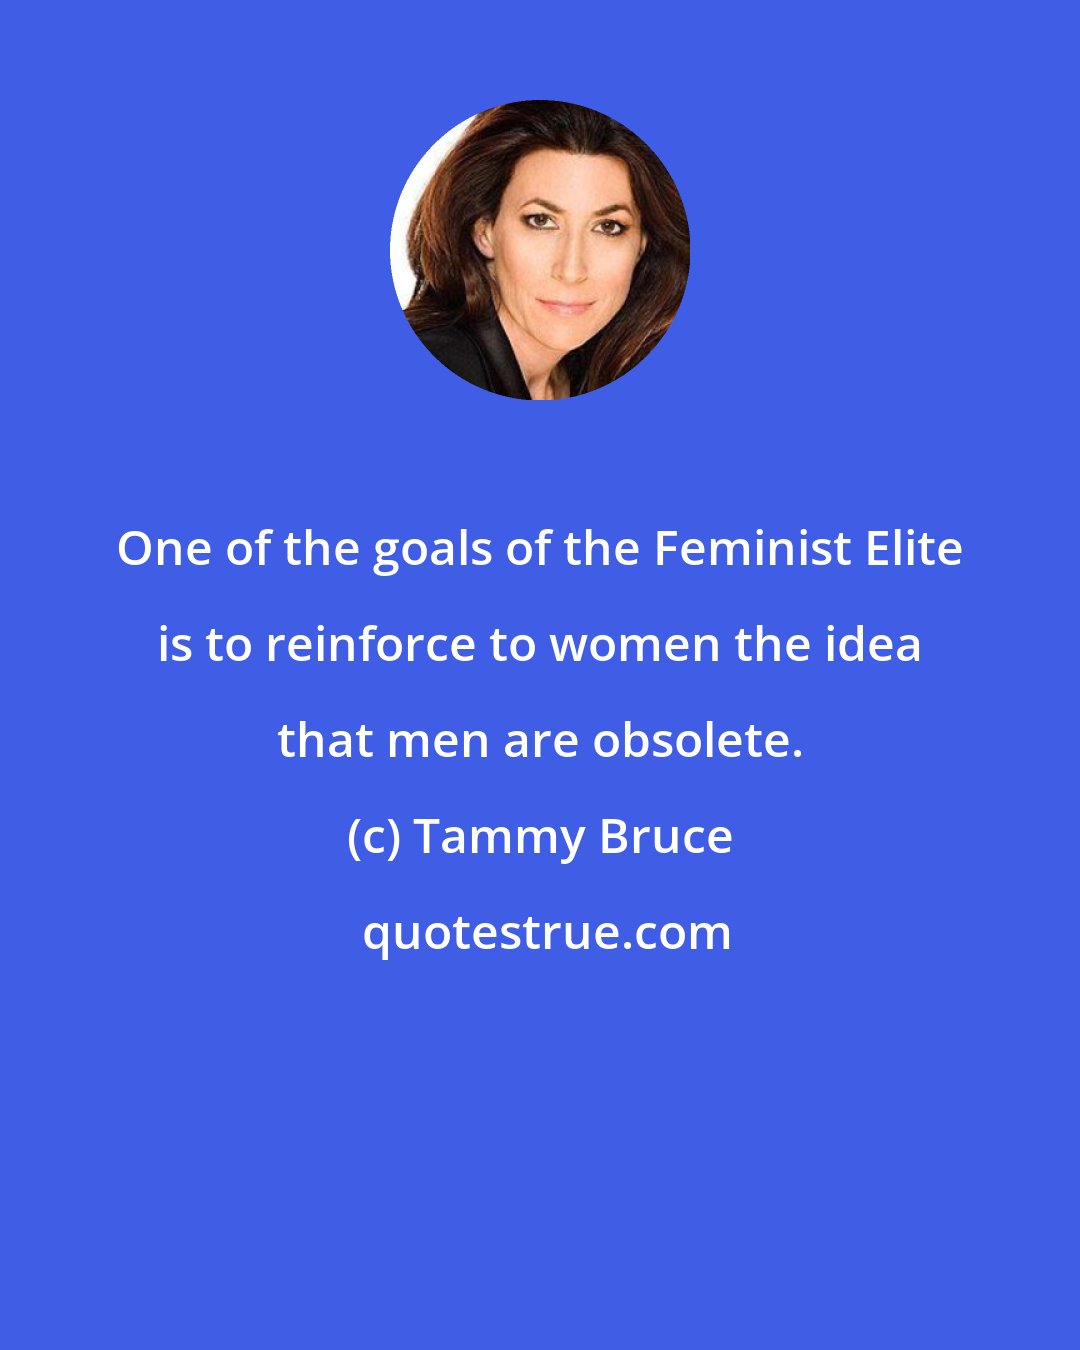 Tammy Bruce: One of the goals of the Feminist Elite is to reinforce to women the idea that men are obsolete.